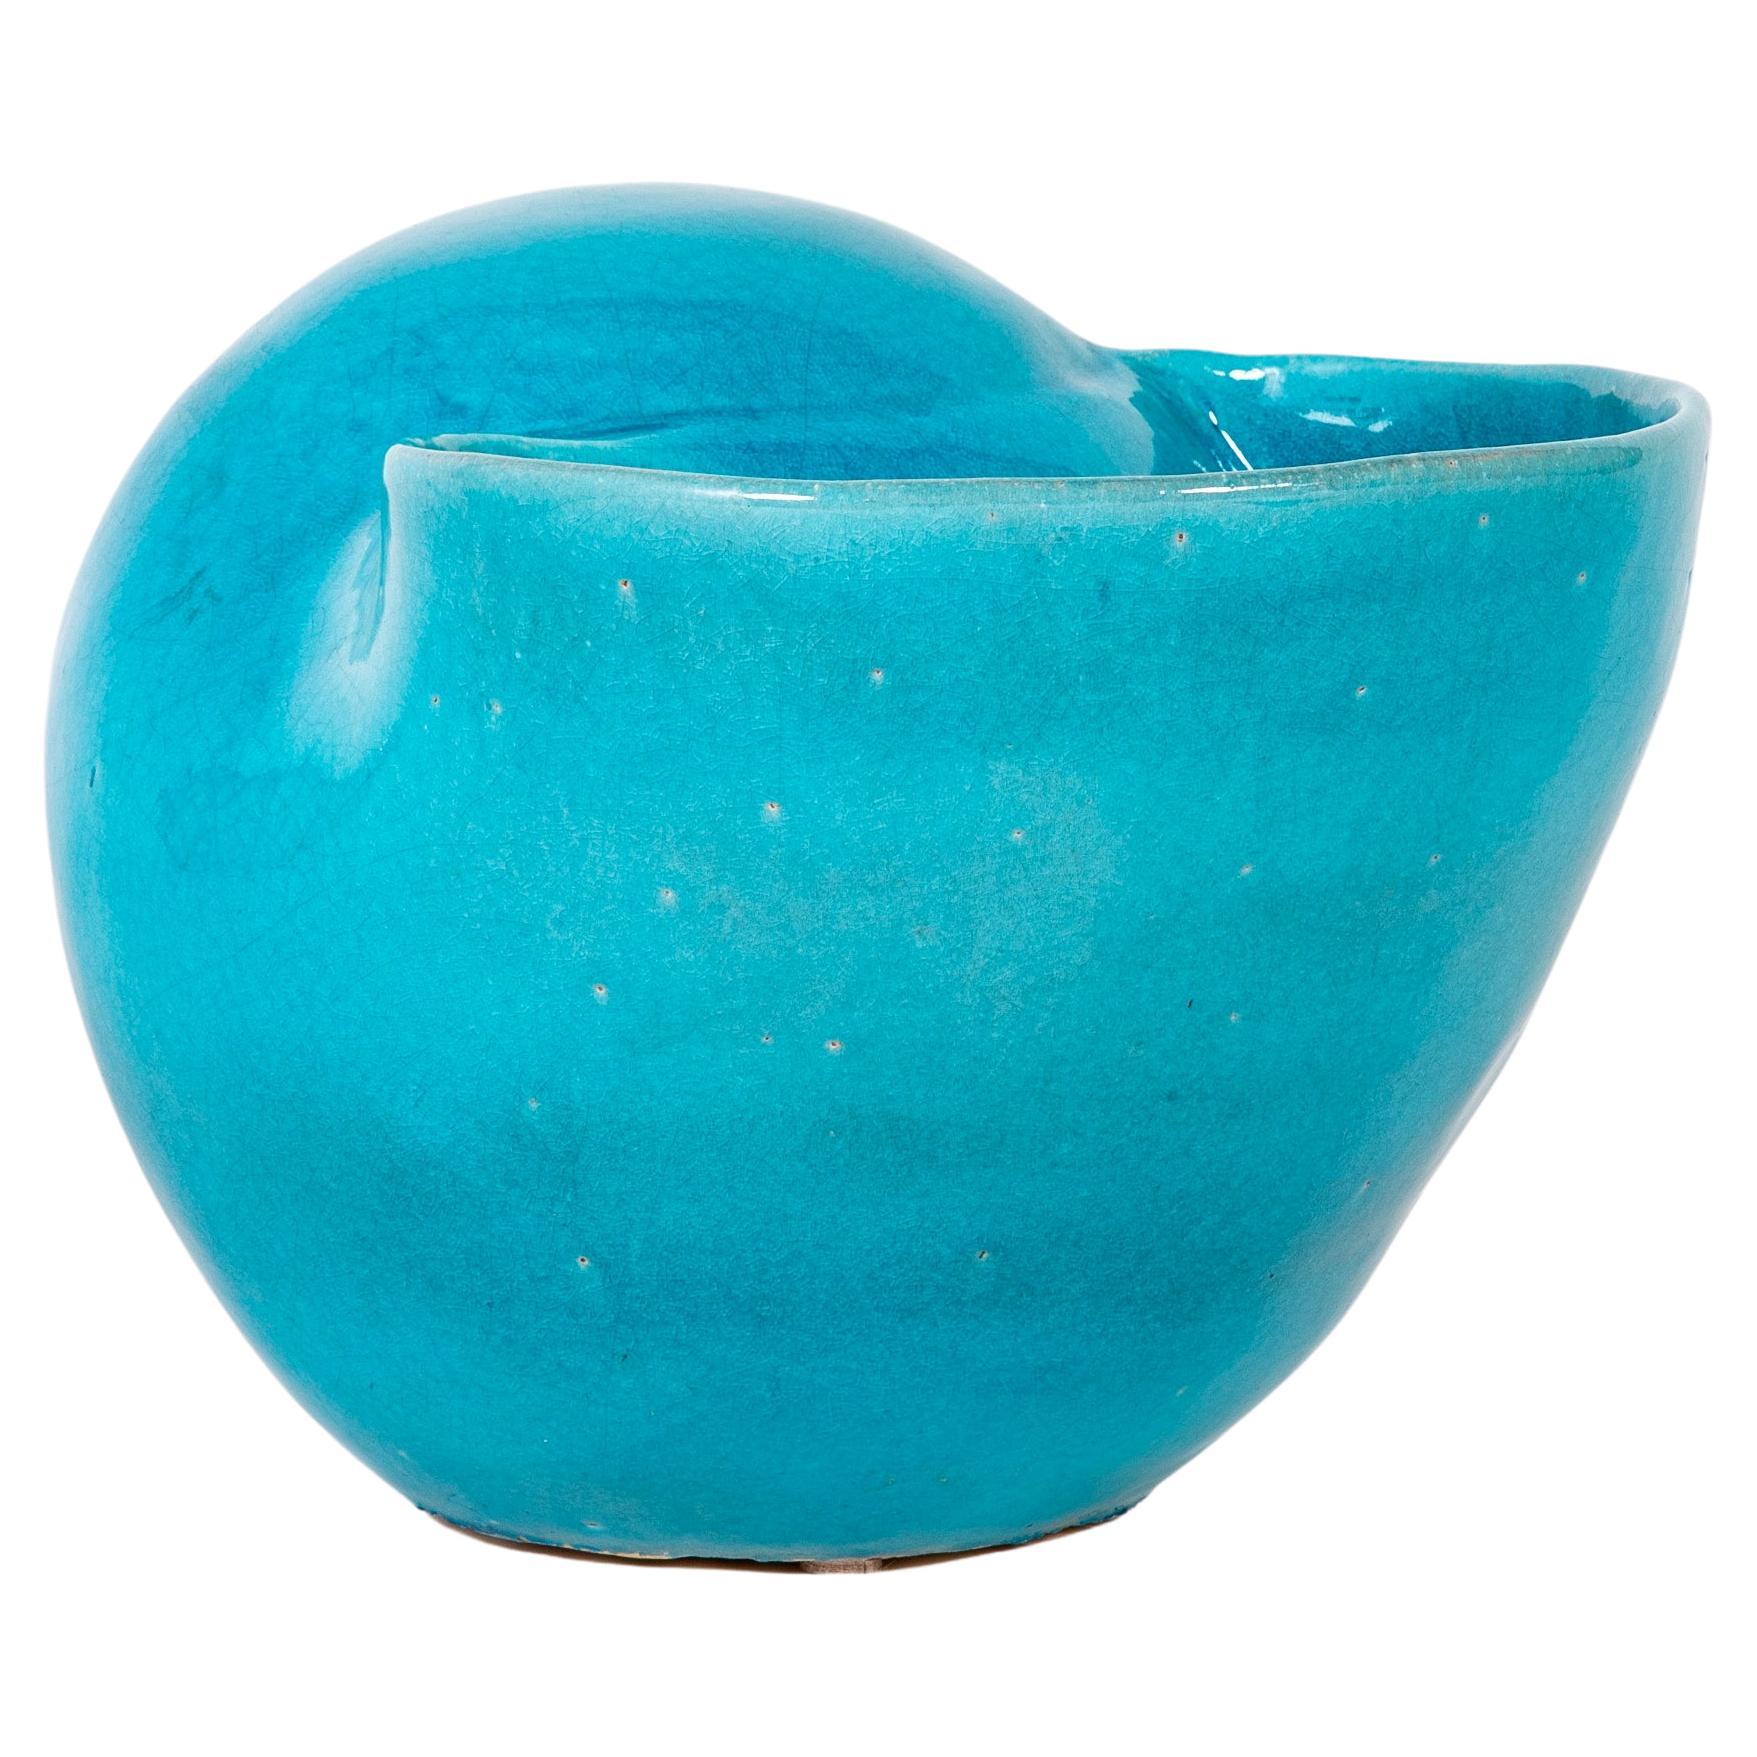 Stunning large scale sea shell turquoise blue glazed ceramic vase. A wonderful piece of sculpture as is, it will also make a fantastic vase or planter. The blue just glows and the form is quite appealing. Stamped with the Chinese symbol for 'hand',